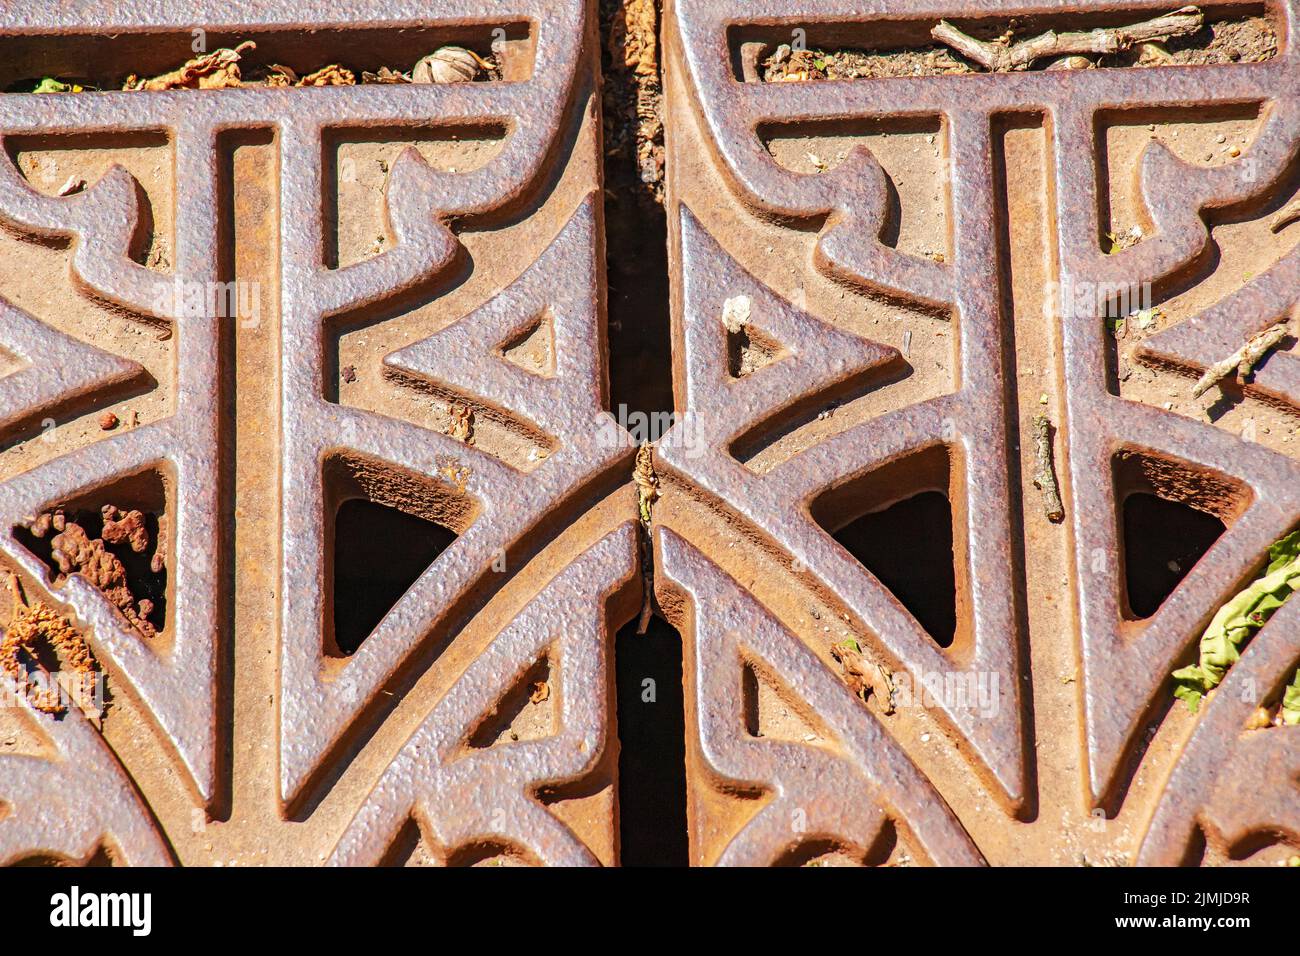 Close-up iron grate drainage system for draining rainwater in Slovakia. Stock Photo